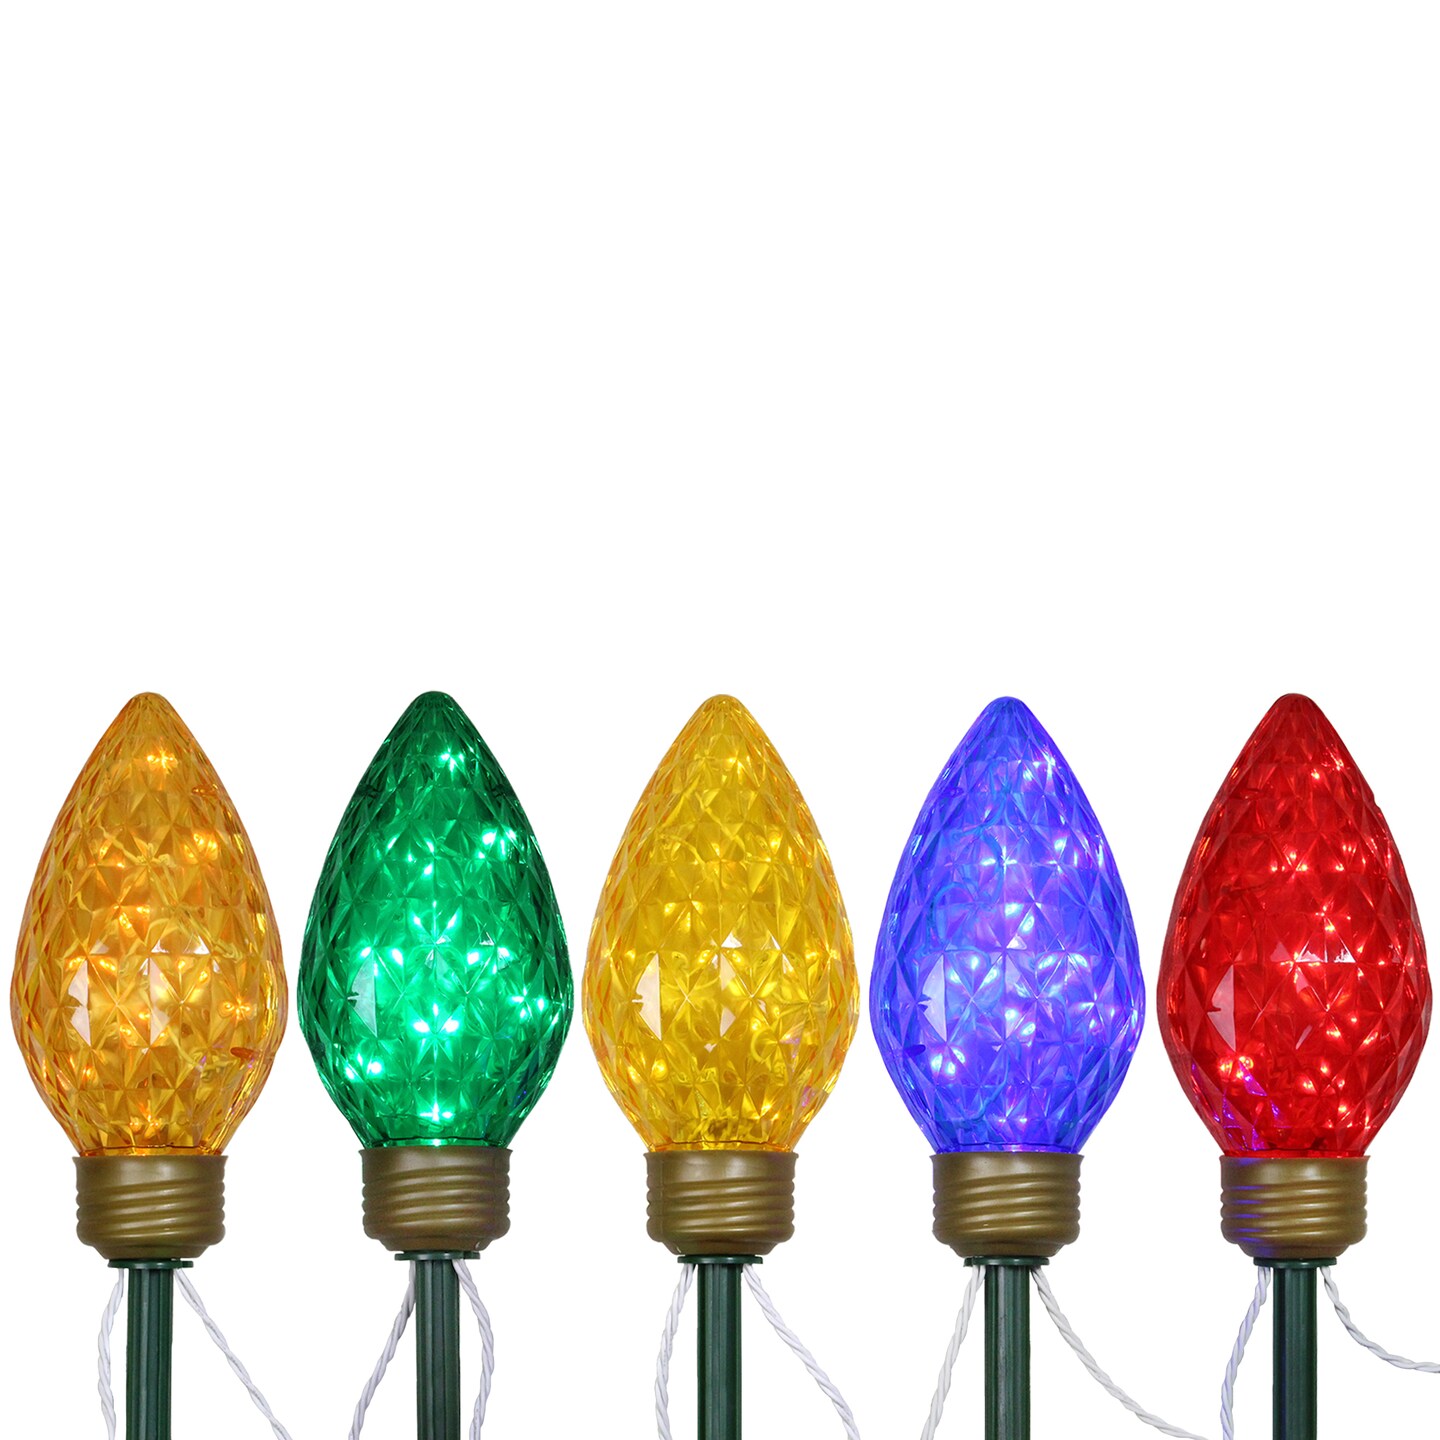 Northlight 5ct LED Lighted Multi-Color C9 Christmas Pathway Marker Lawn Stakes - 8 ft